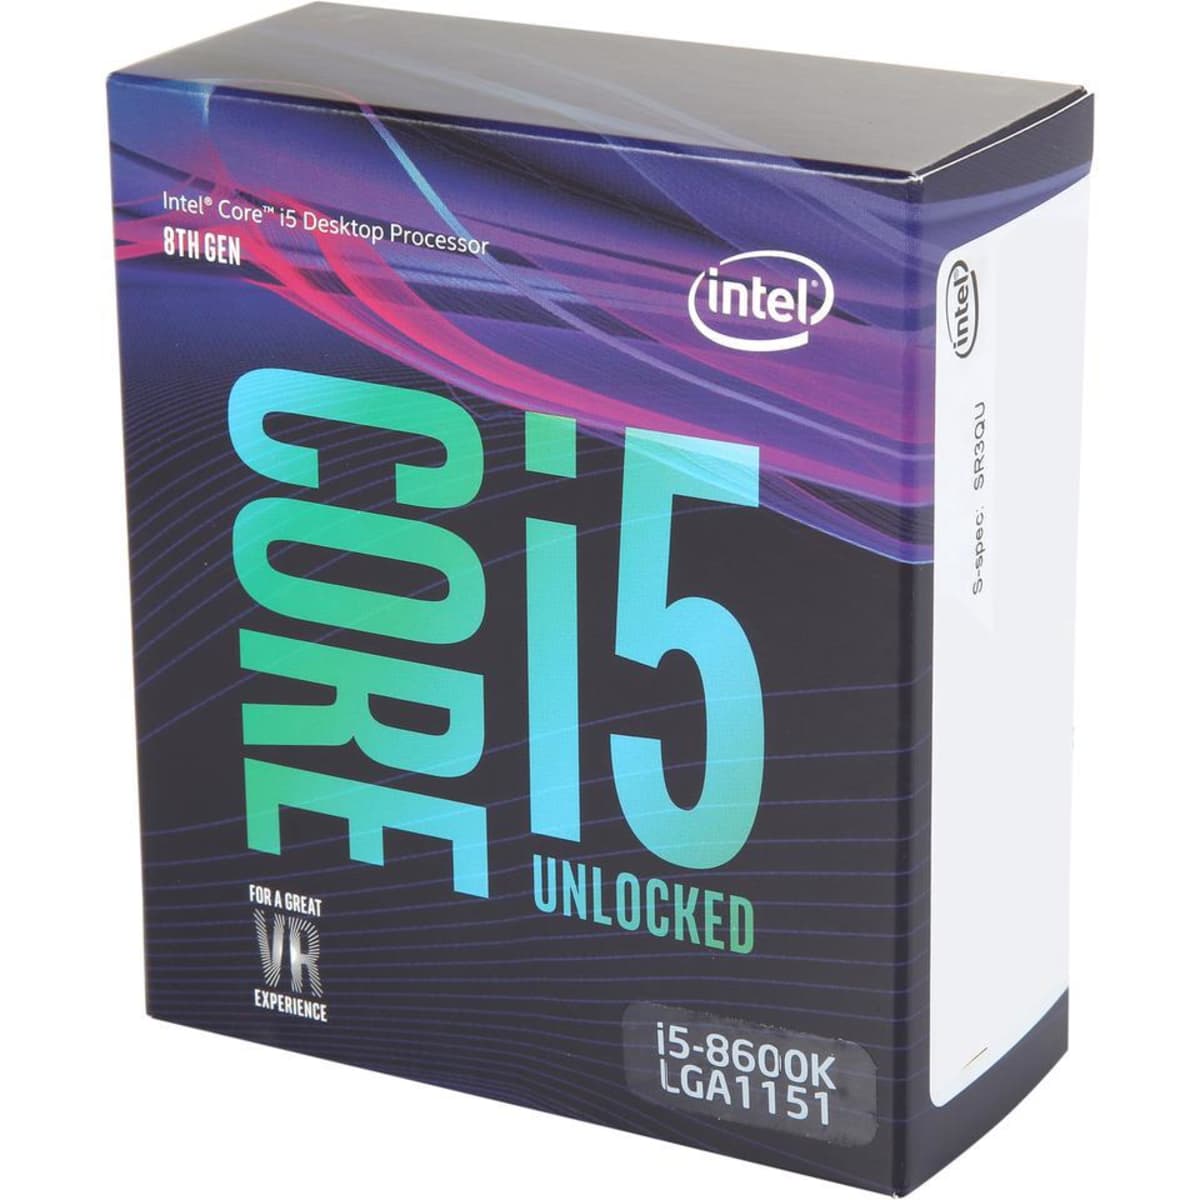 Intel Core i5-8400 Coffee Lake CPU Review and HubPages